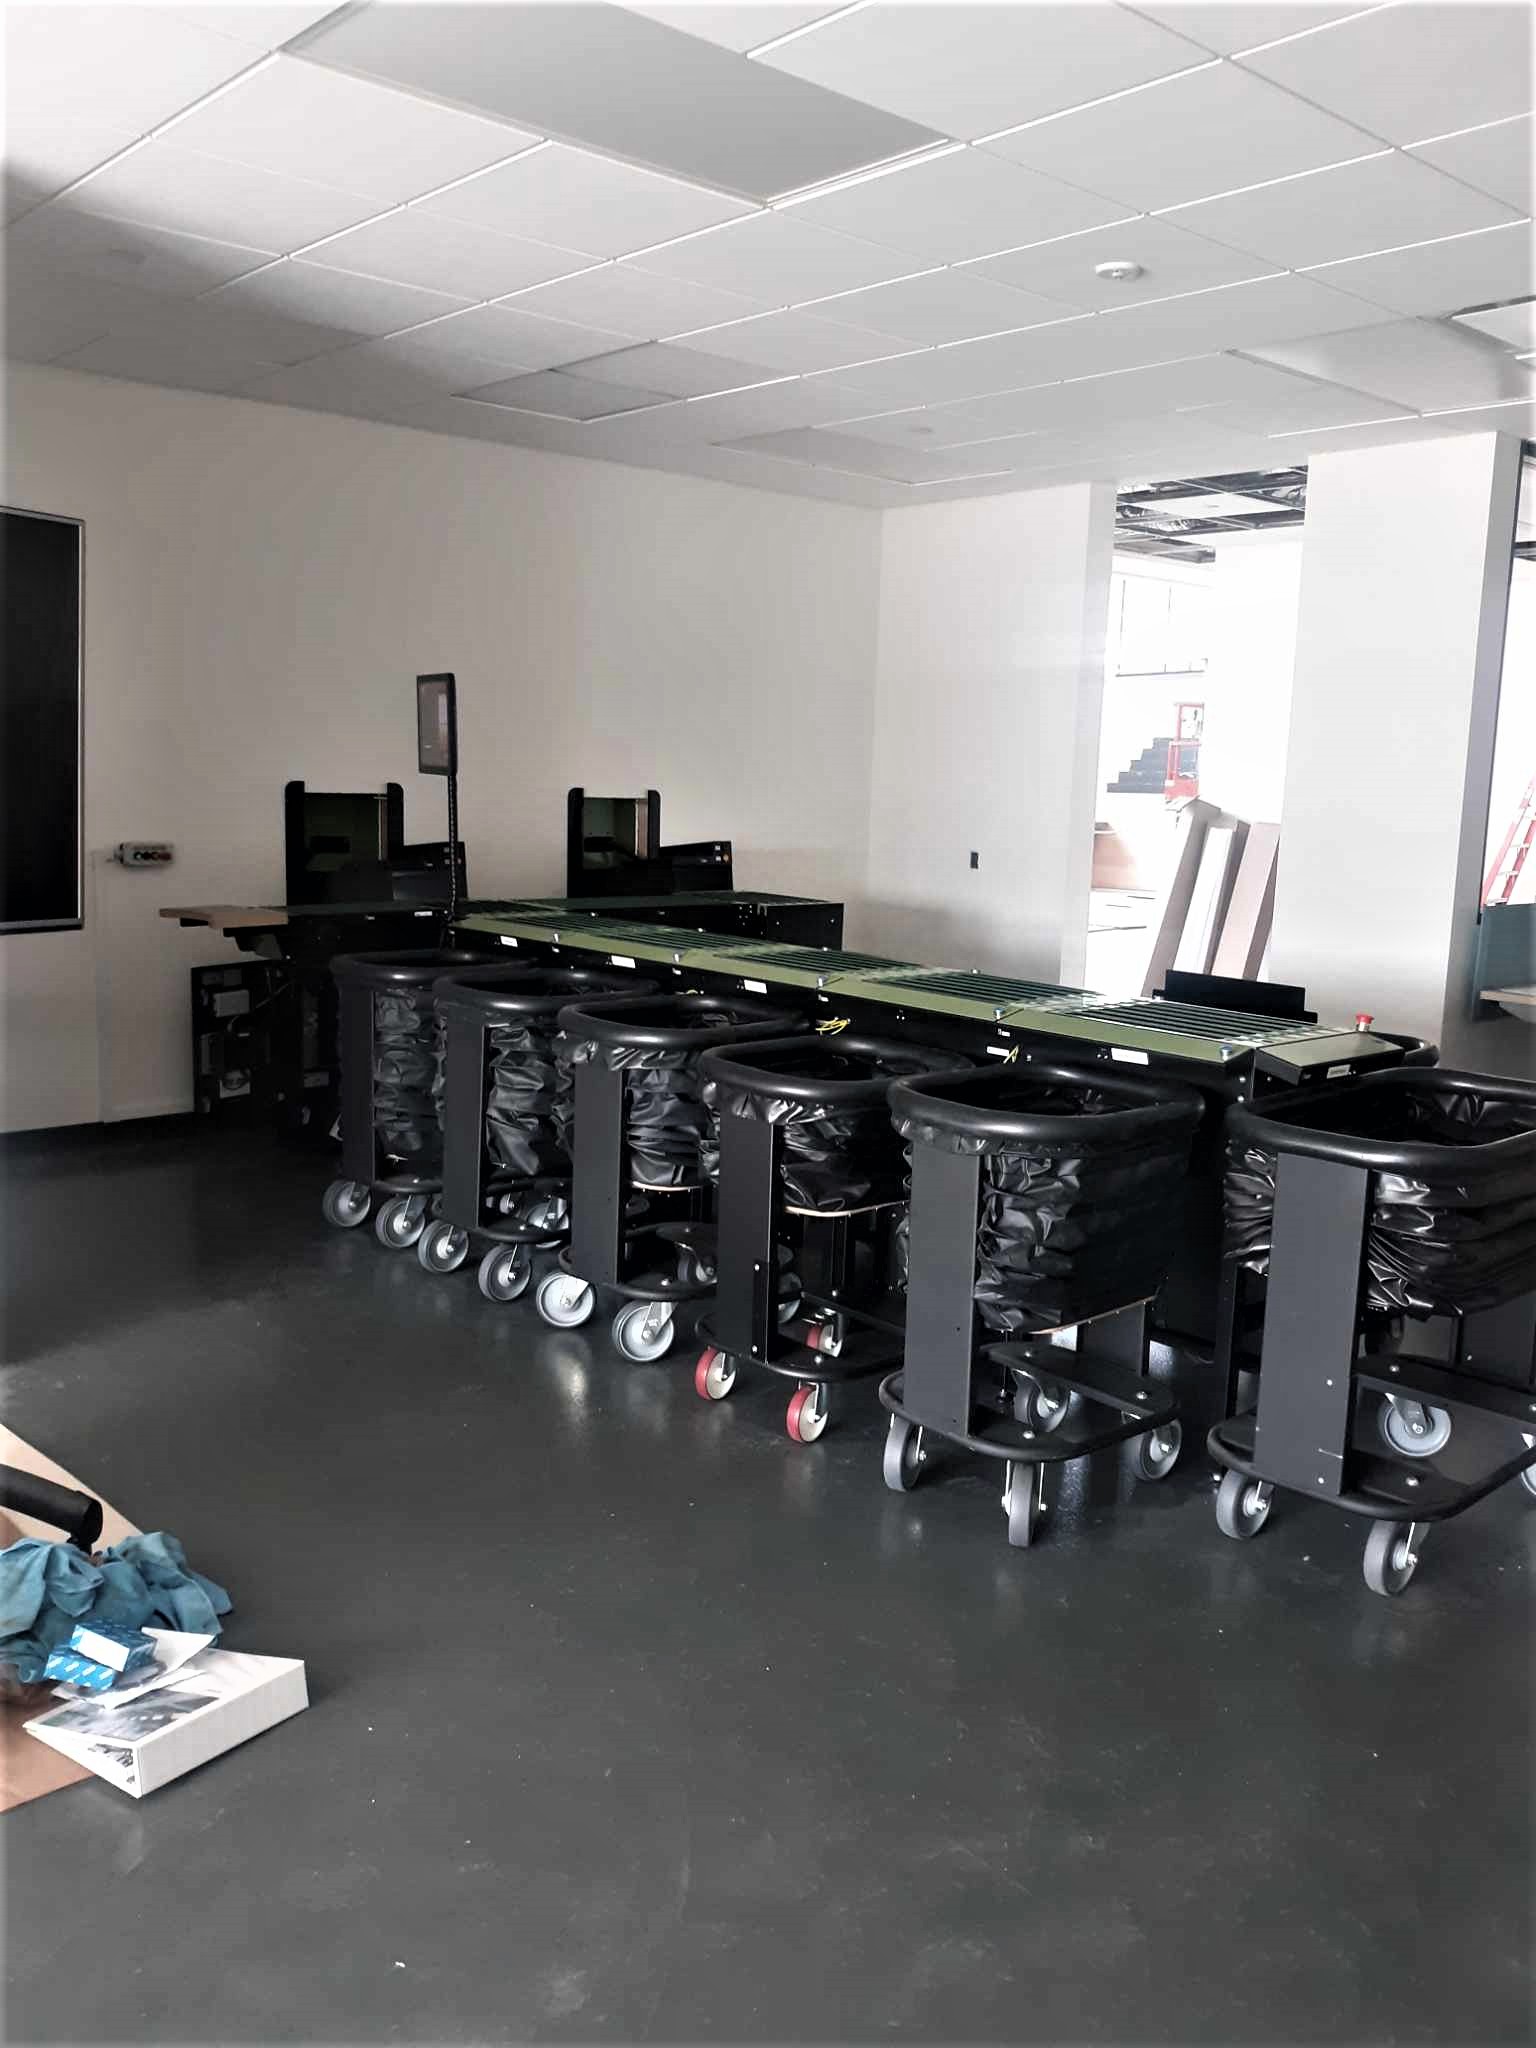 Machine that sorts material returned by patrons into departments is set up in the new circulation workroom space.